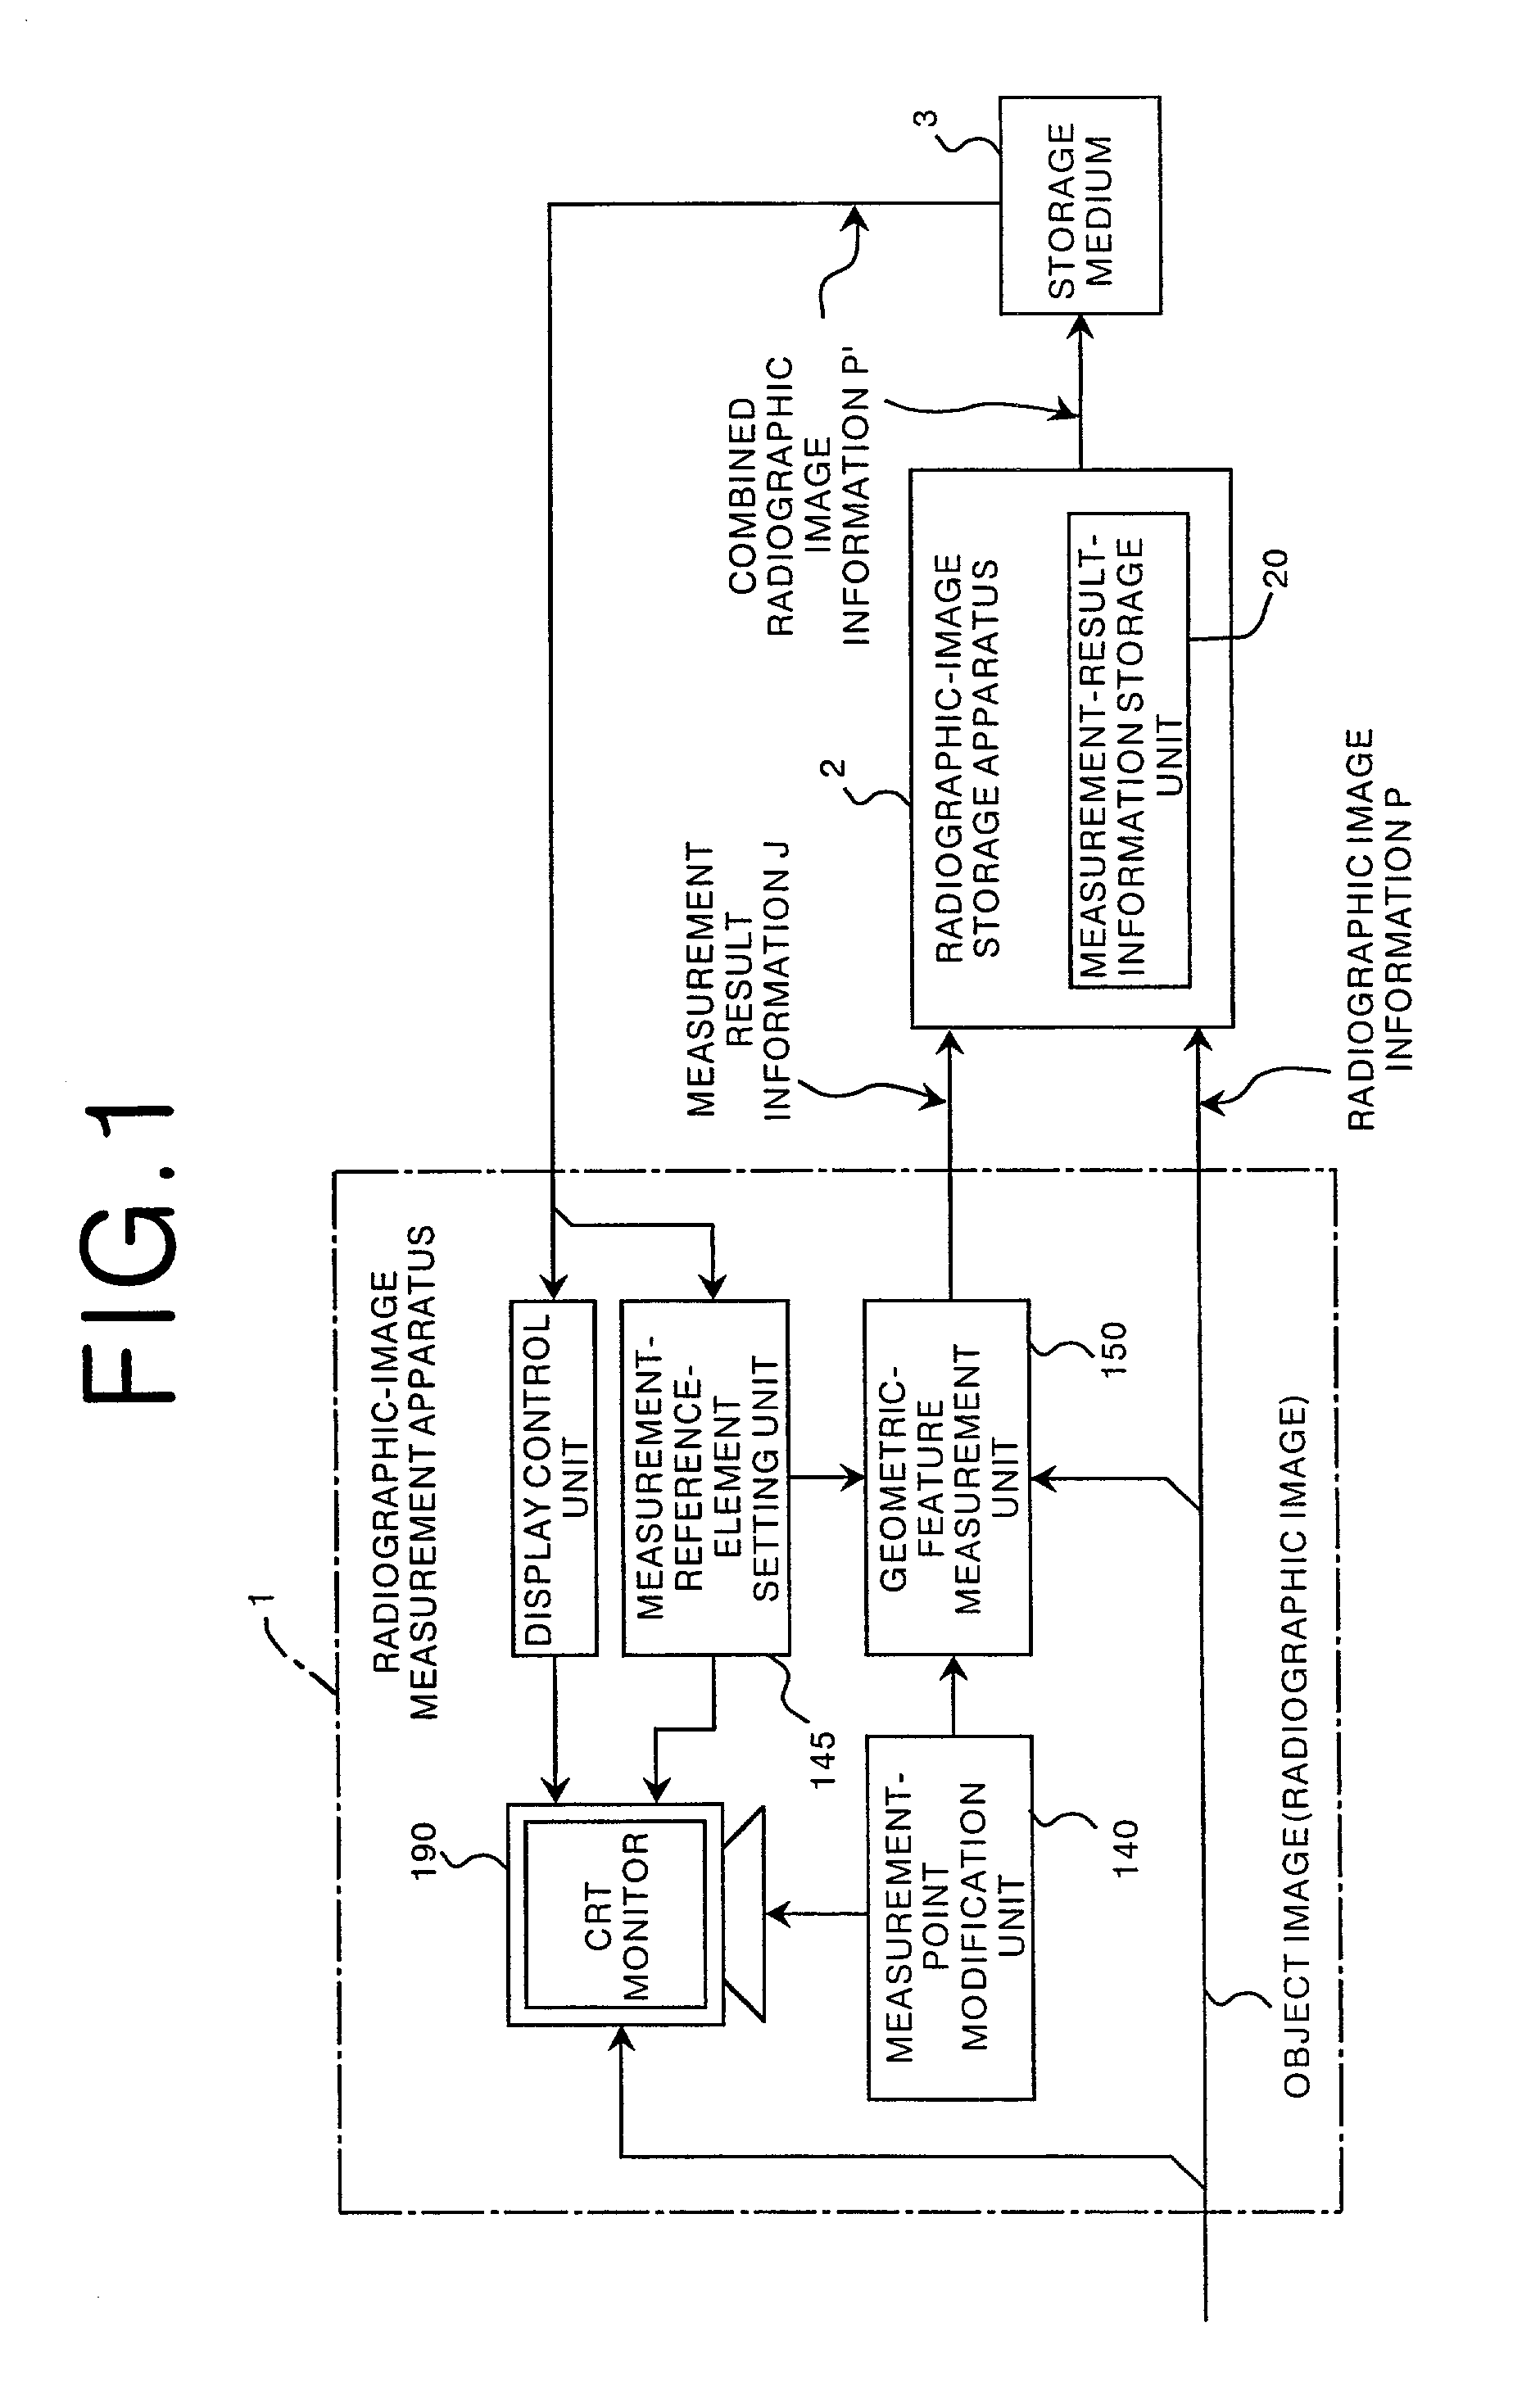 Apparatus for automatically setting measurement reference element and measuring geometric feature of image